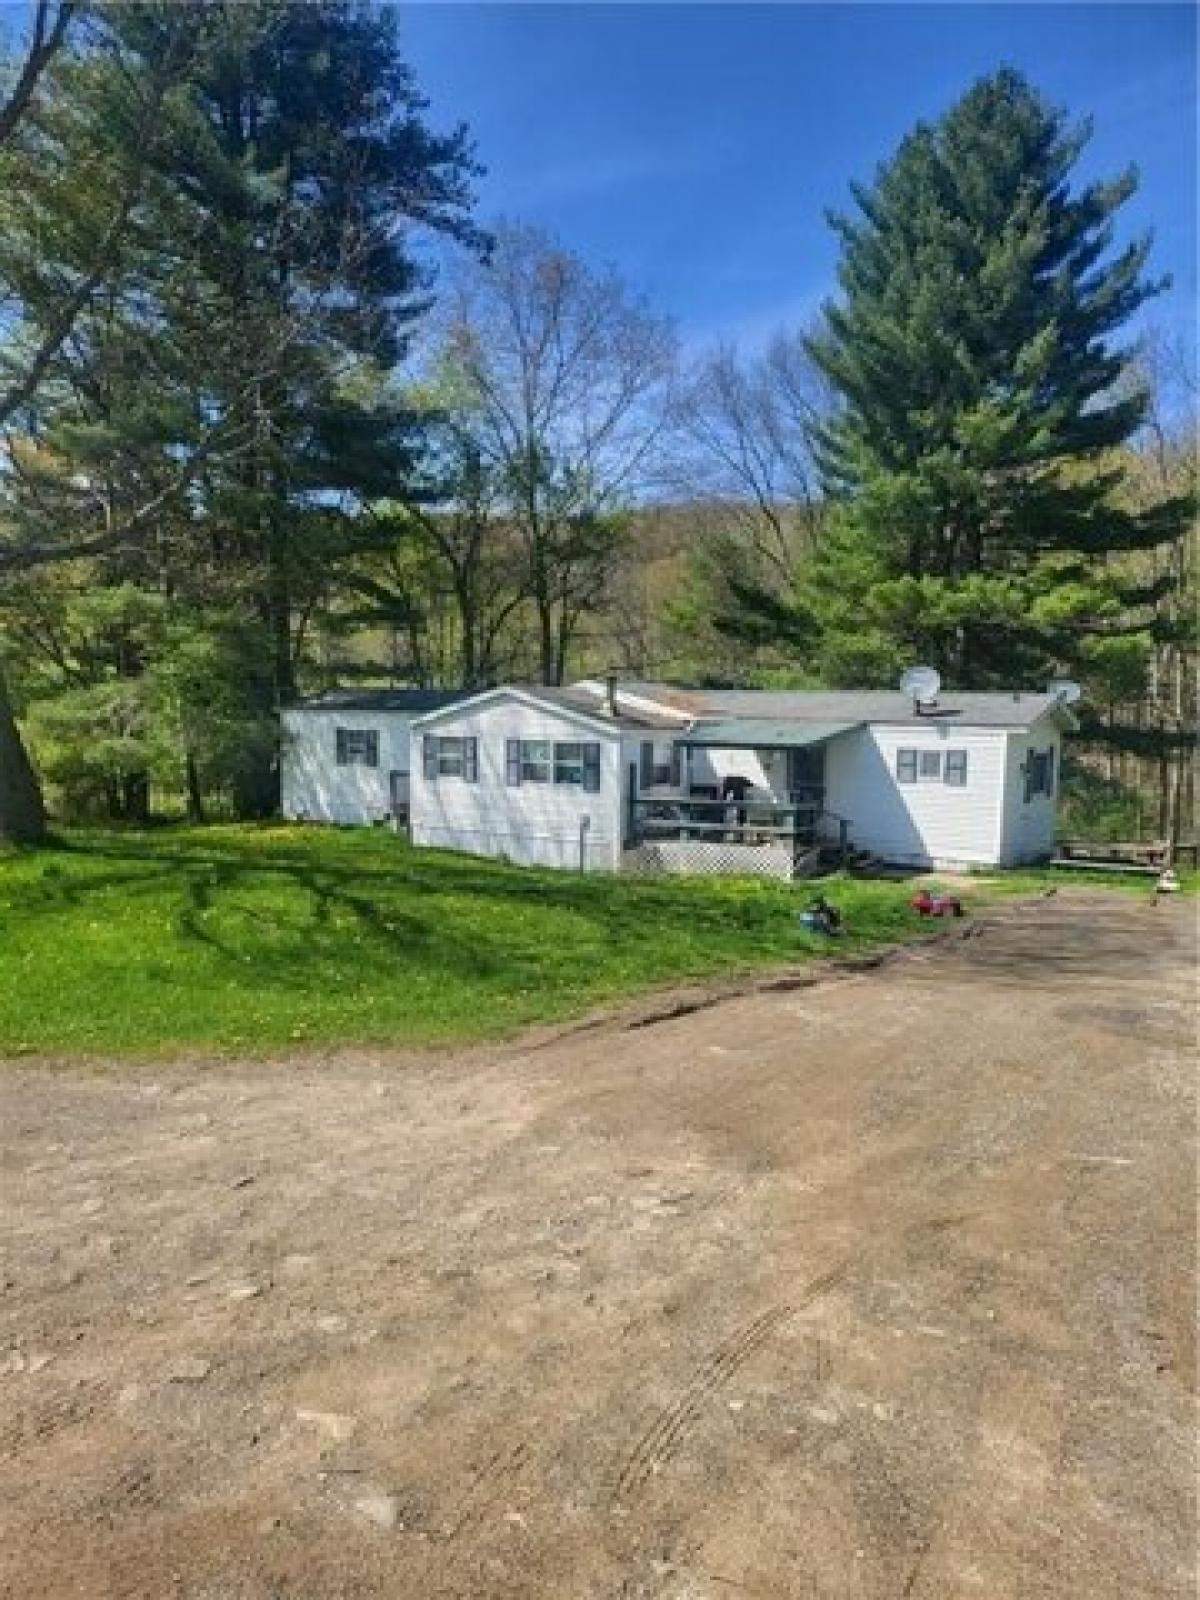 Picture of Home For Sale in Portville, New York, United States